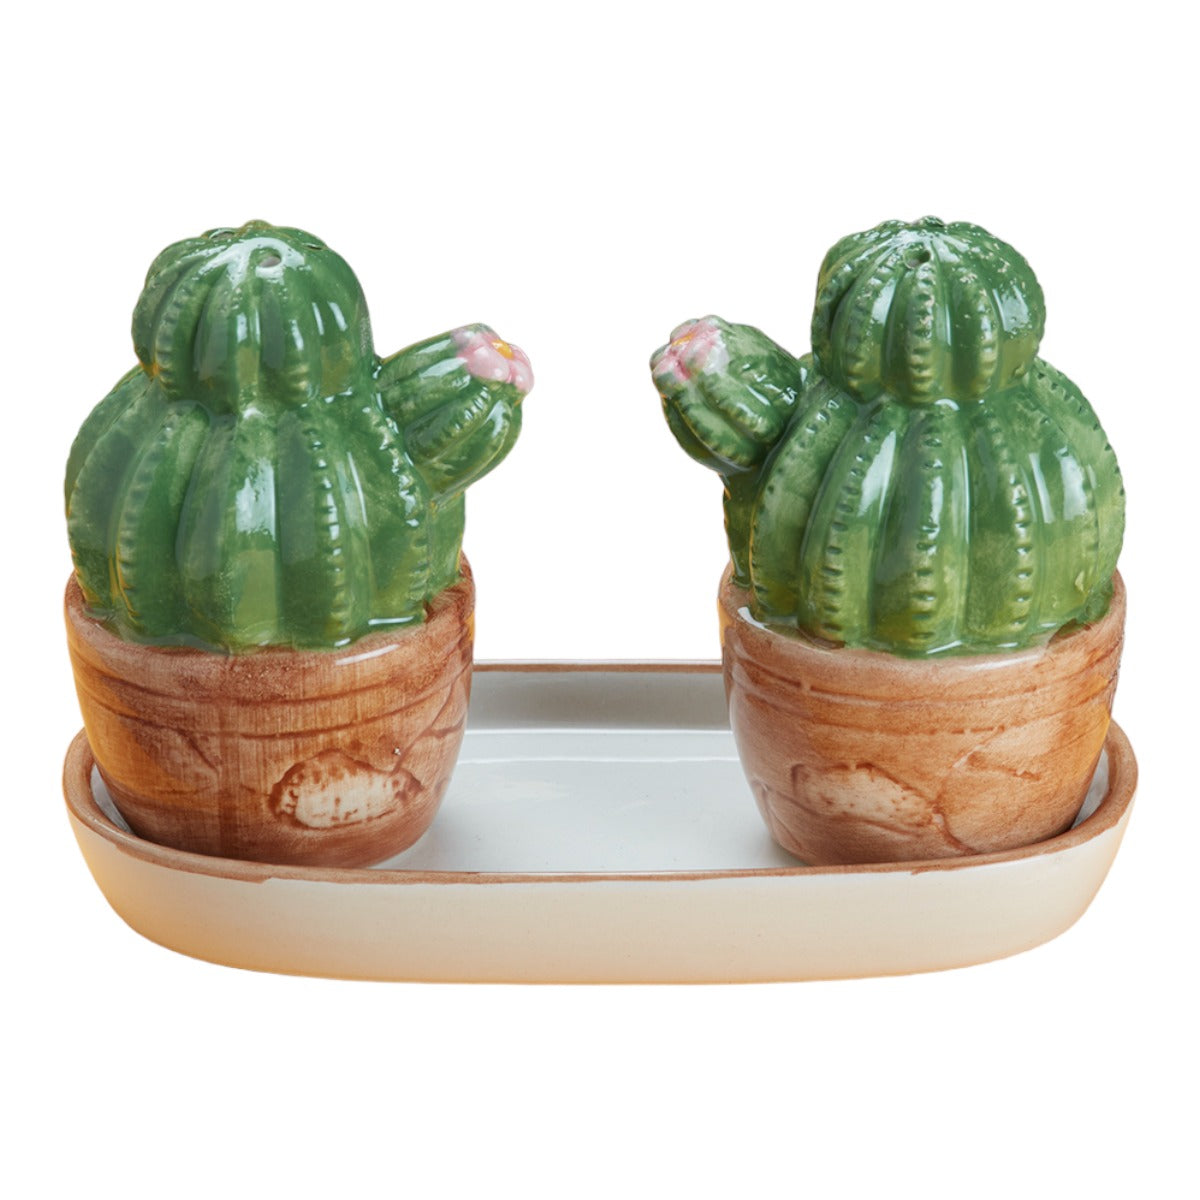 Ceramic Salt Pepper Container Set with tray for Dining Table (9982)